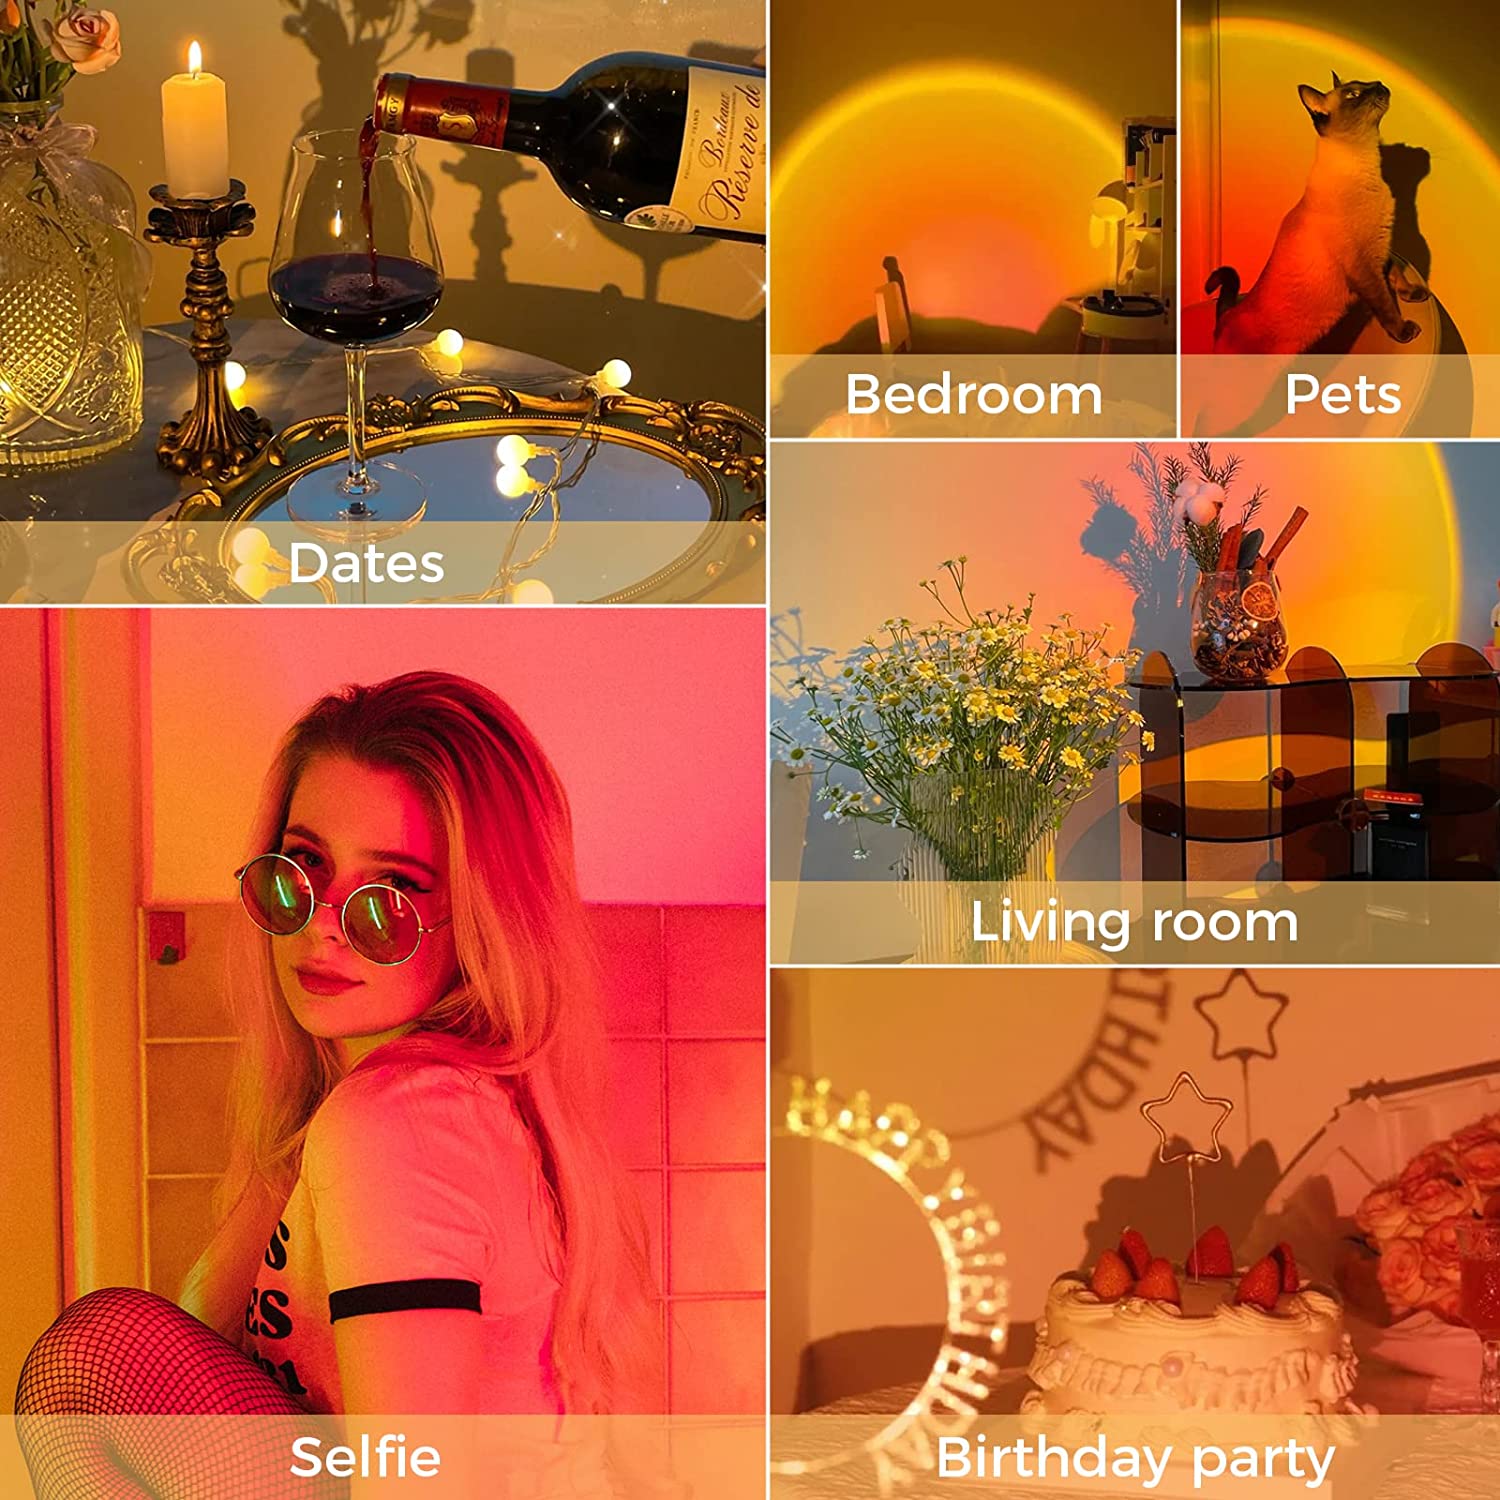 Sunset Lamp, 16 Colors Sunset Projection Lamp, Brightness Adjustable Sunset Projector Light Mood Lights, Rainbow Lamp with Remote 4 Dynamic Modes Valentines Mothers Day Gifts [Energy Class A] Wintory